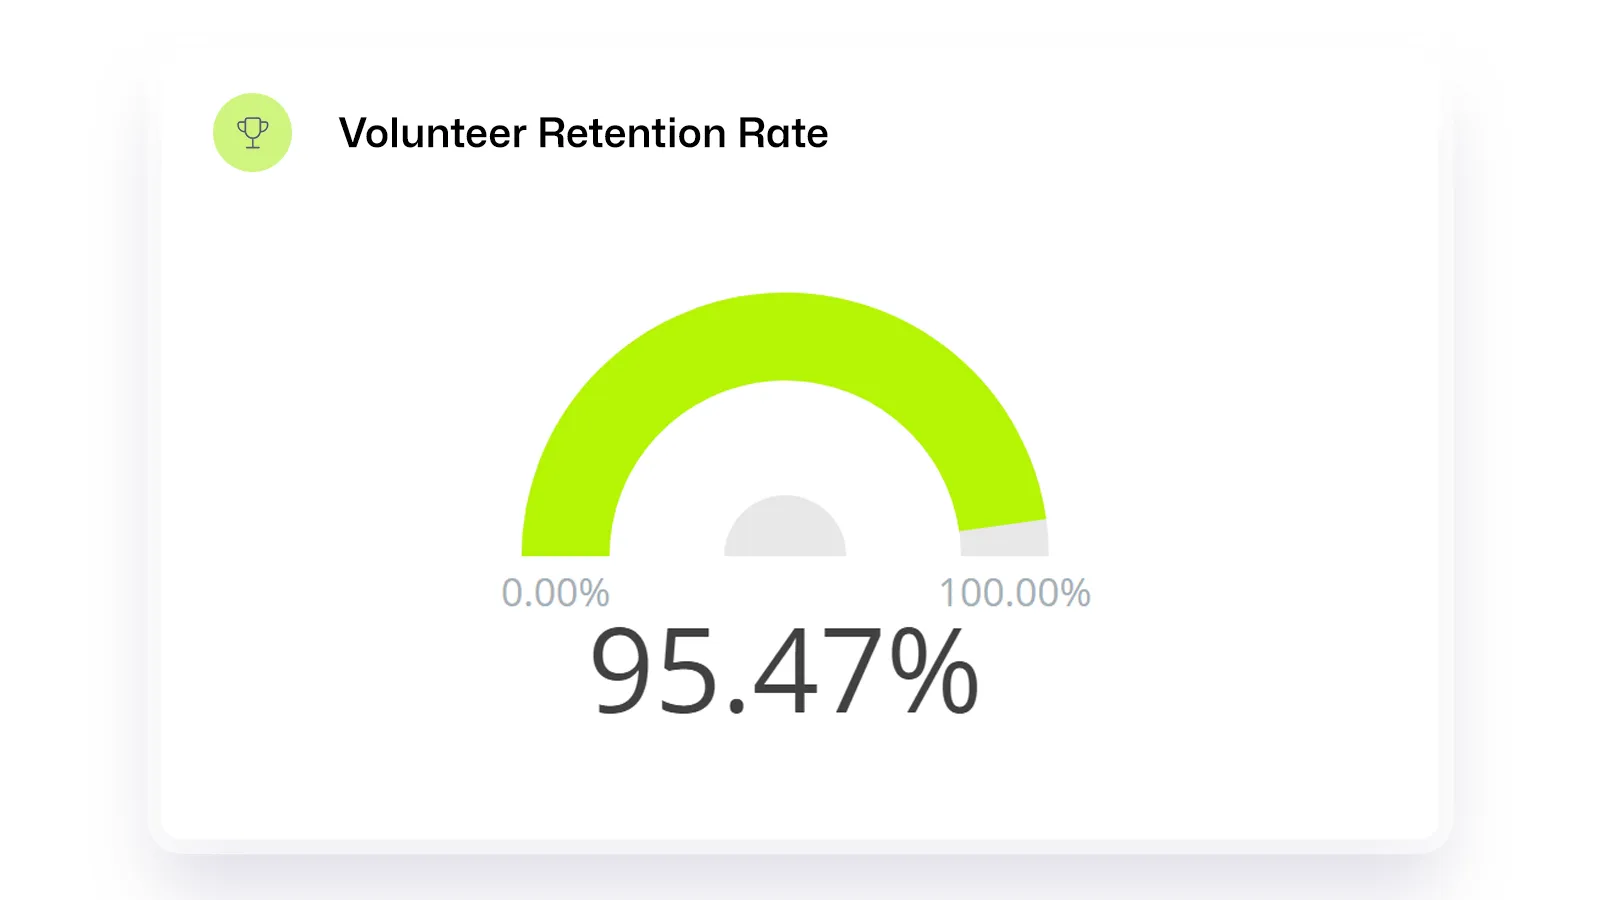 A gauge chart displaying a volunteer retention rate kpi